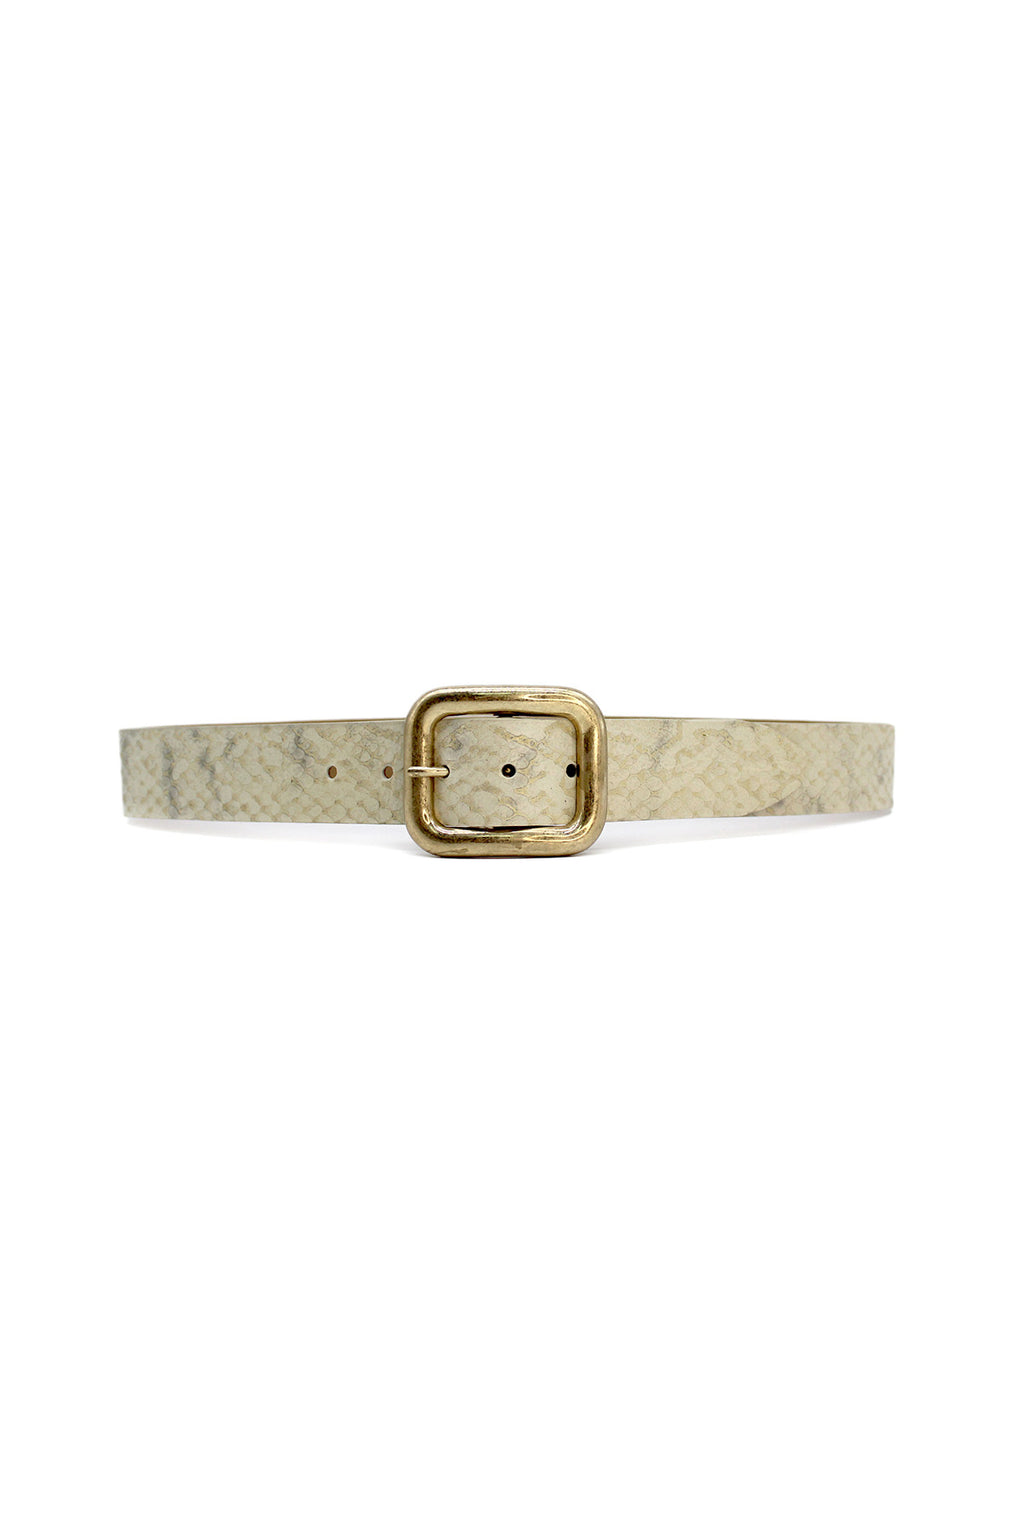 Ivory Metallic Embossed Snake Belt with Gold Buckle